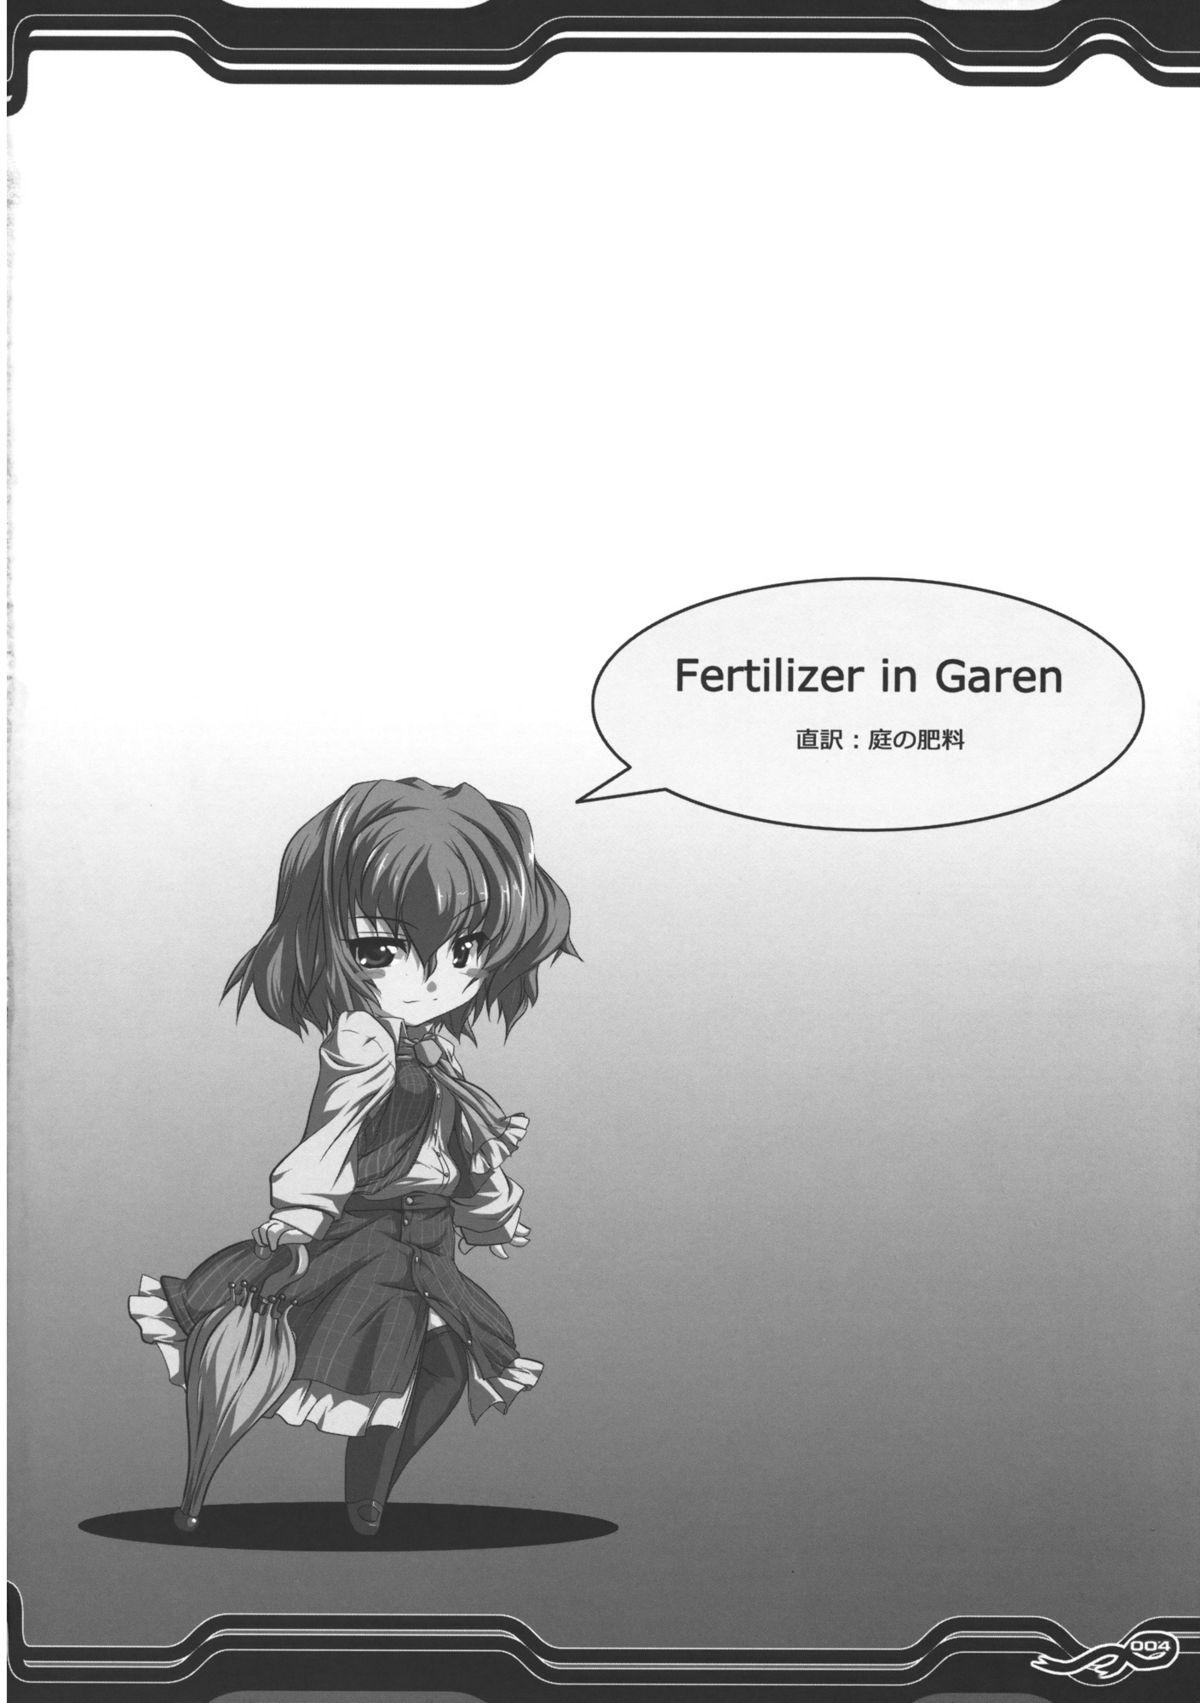 Group FERTILIZER IN GARDEN - Touhou project Nice Ass - Page 3